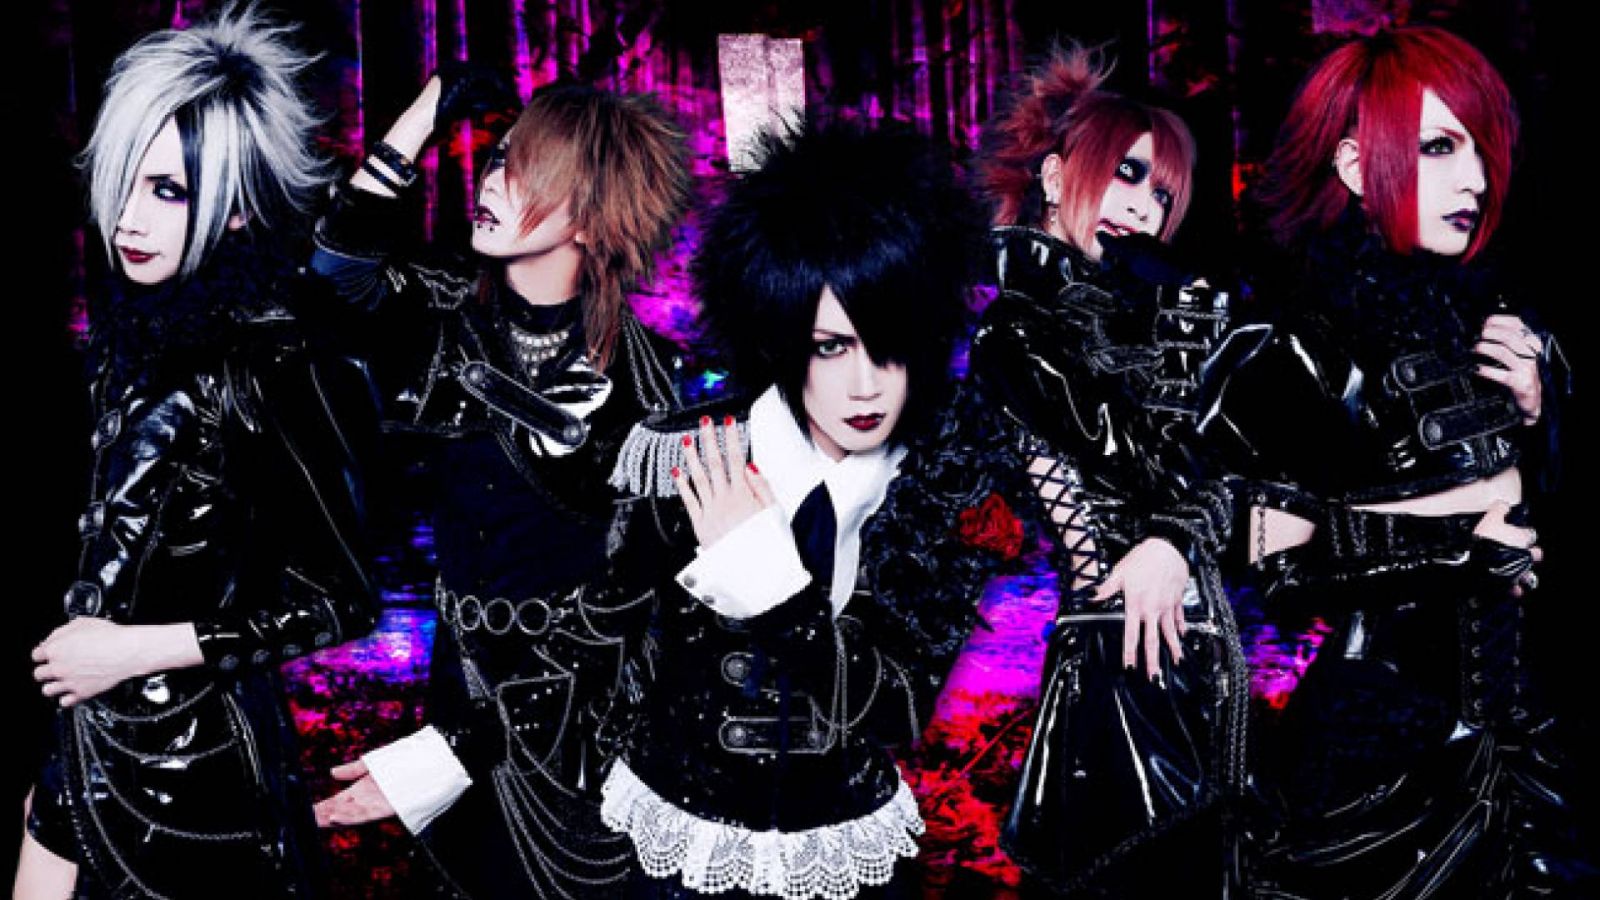 MeteoroiD anuncia novo single © 2015 MeteoroiD. All rights reserved.